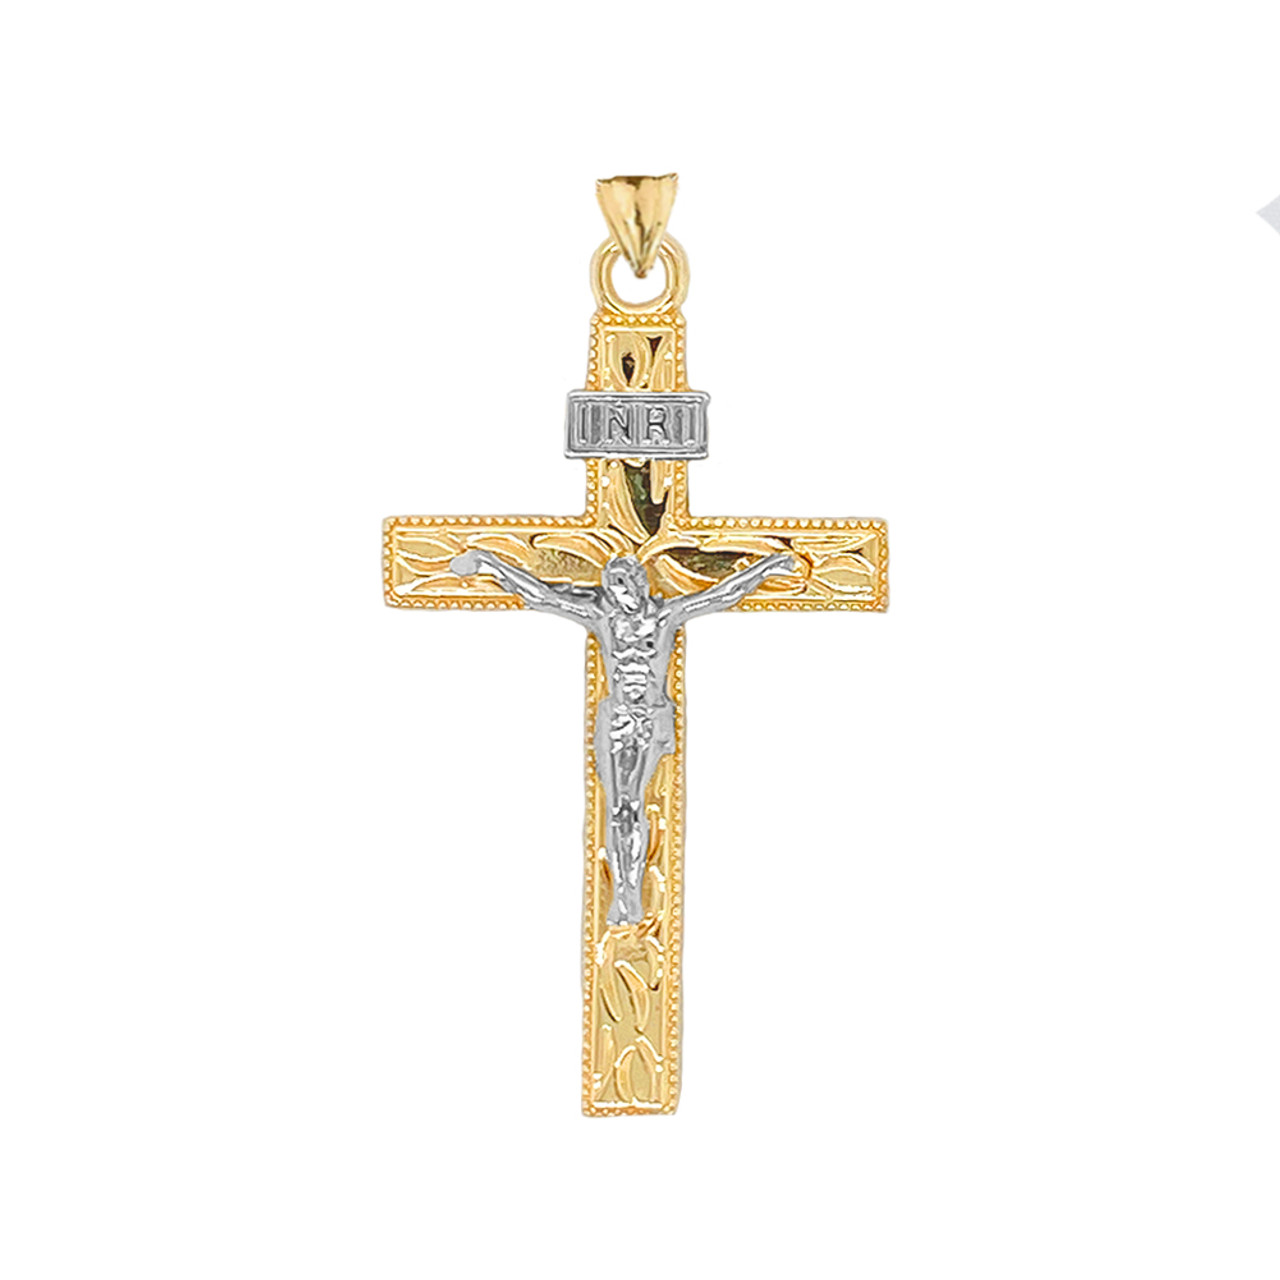 Two Tone Jesus Christ INRI Crucifix Cross Pendant Necklace in Gold  (Yellow/Rose/White) (Large)